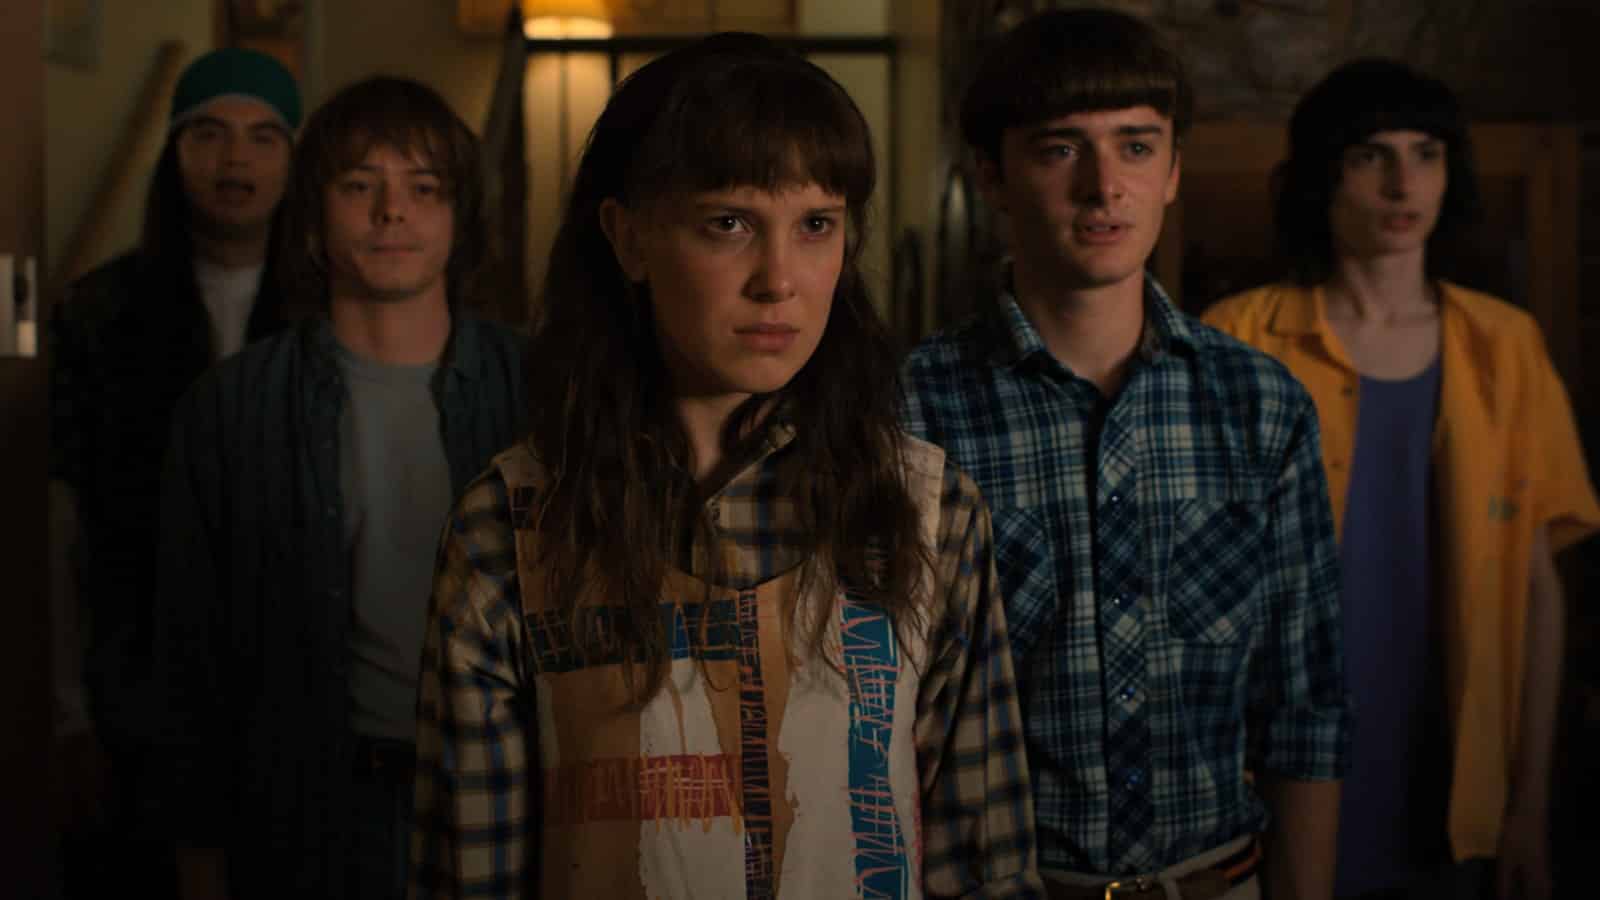 the cast of Stranger things stood looking worried